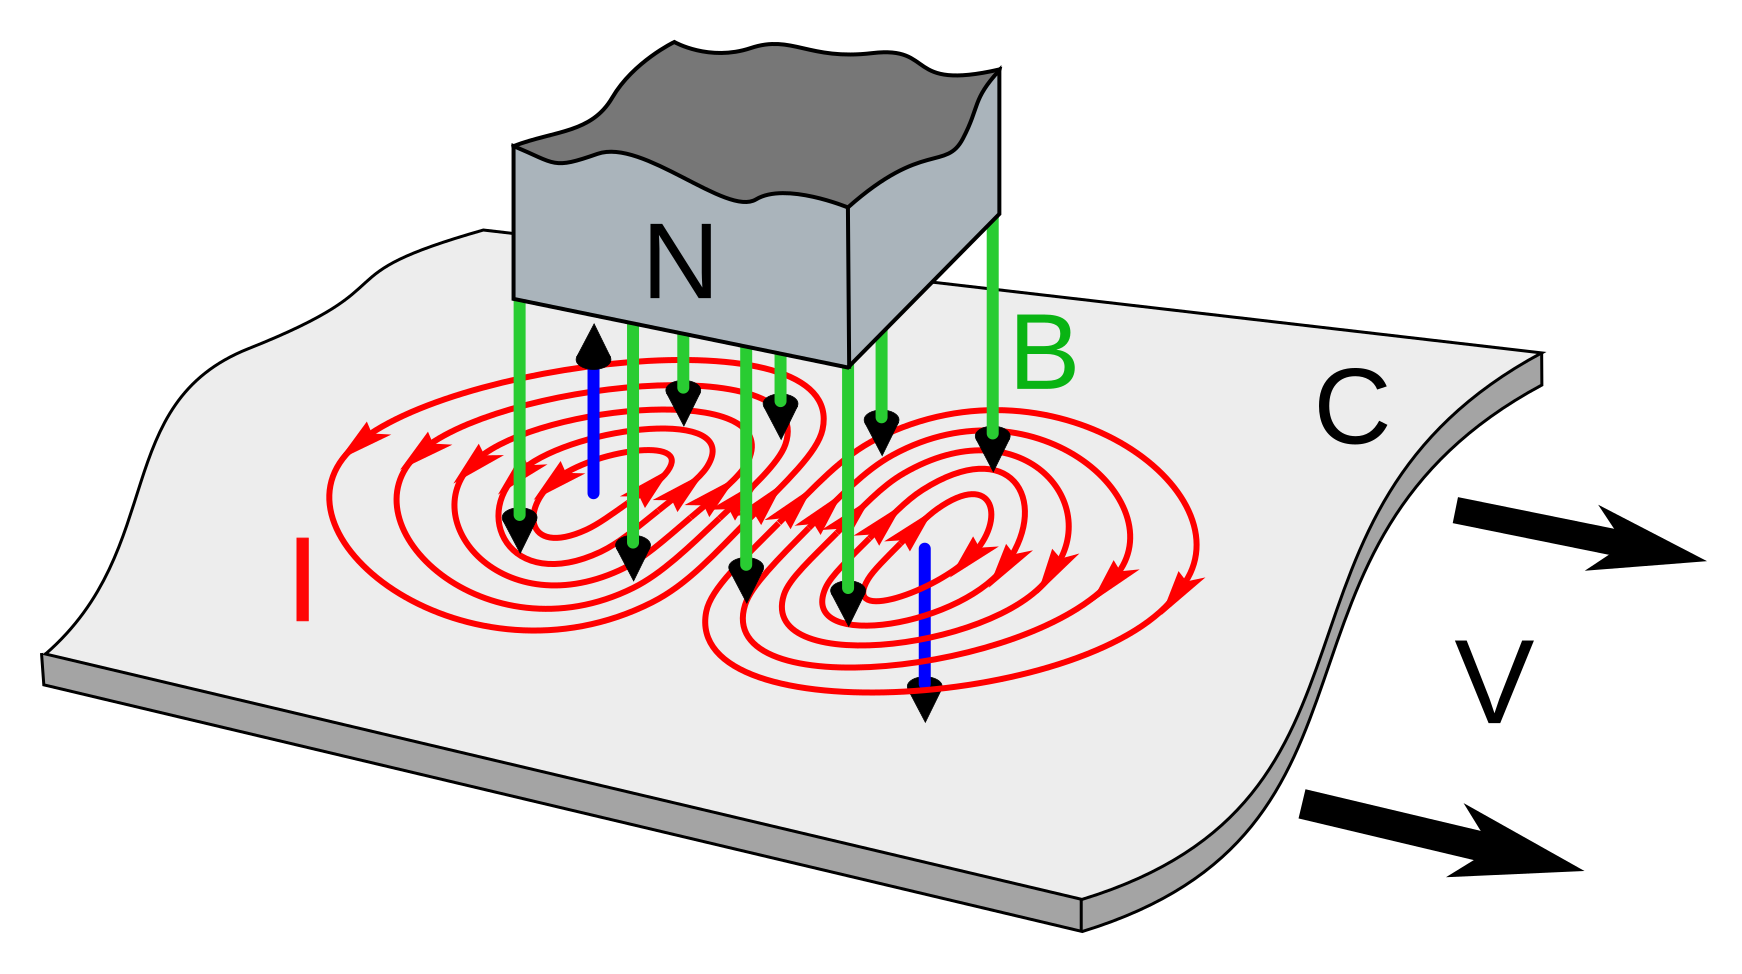 File:Eddy currents due to magnet.svg - Wikimedia